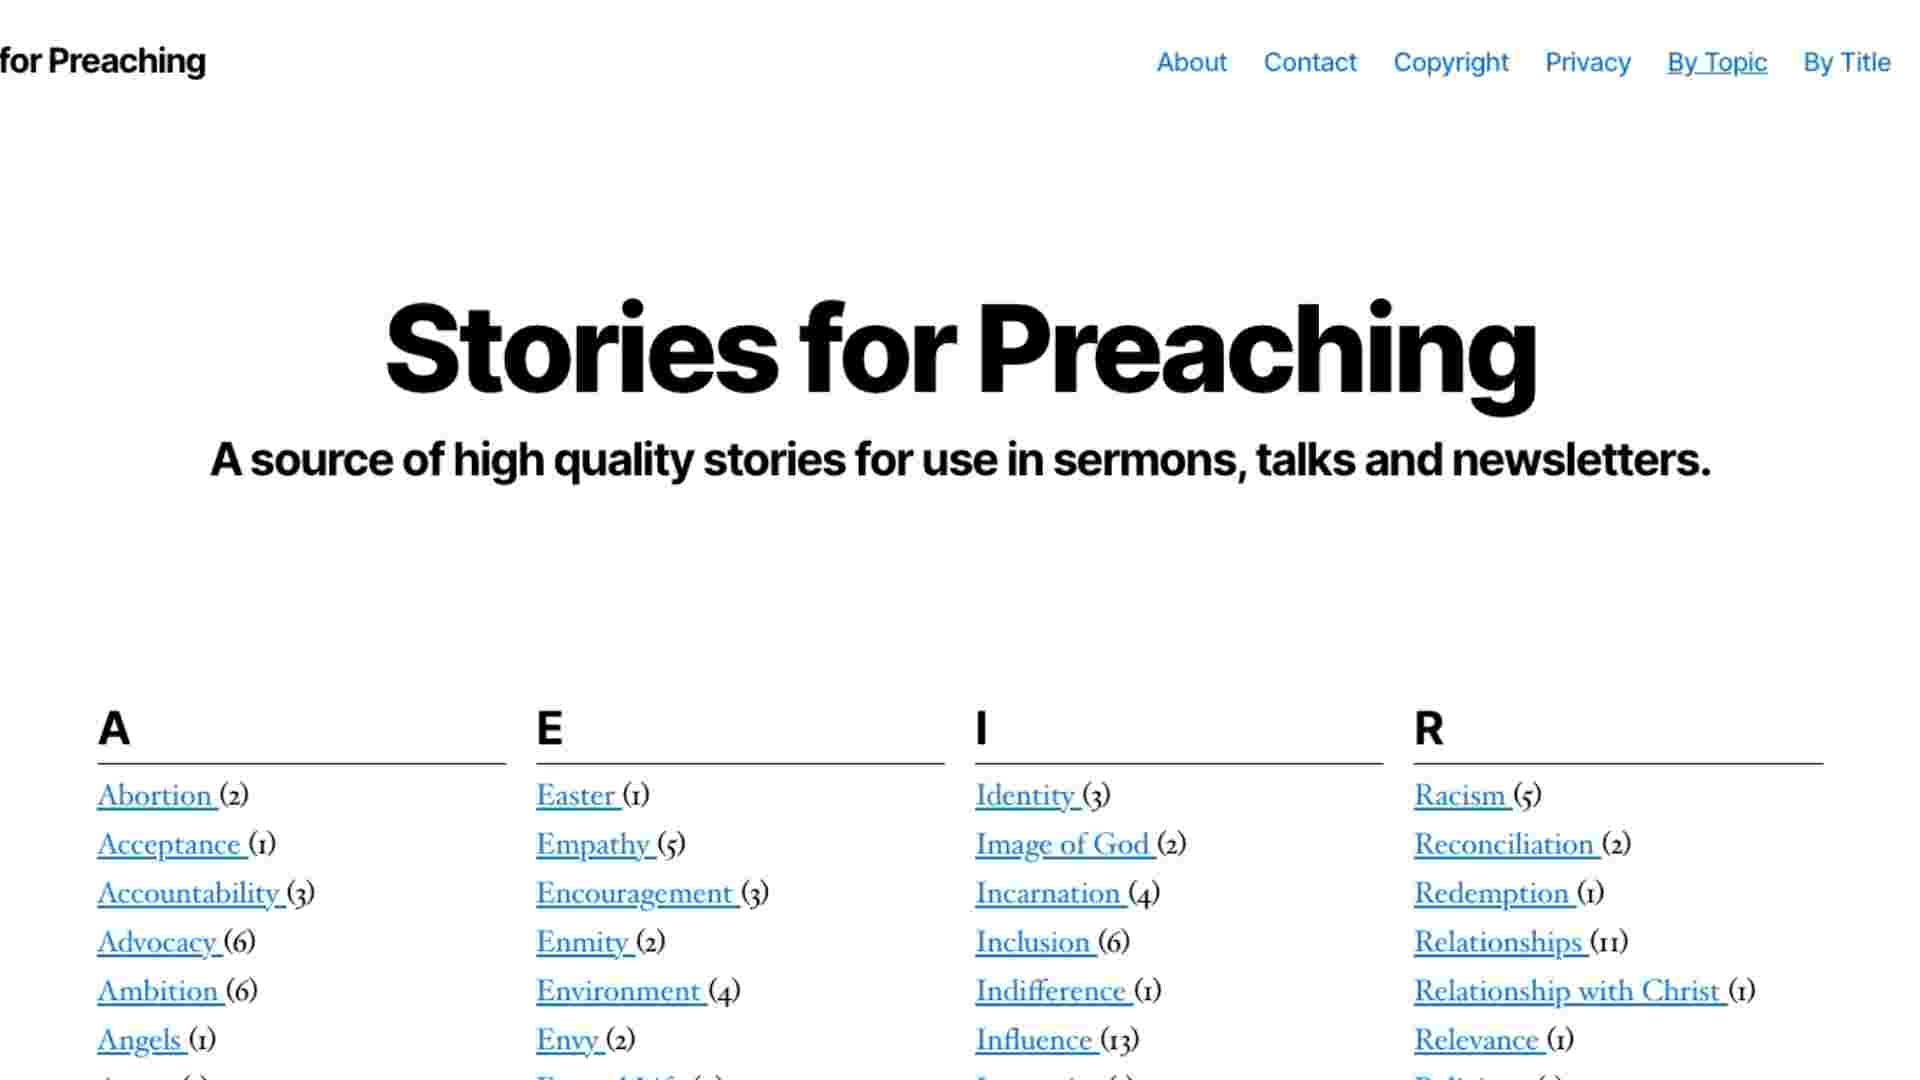 Stories for Preaching